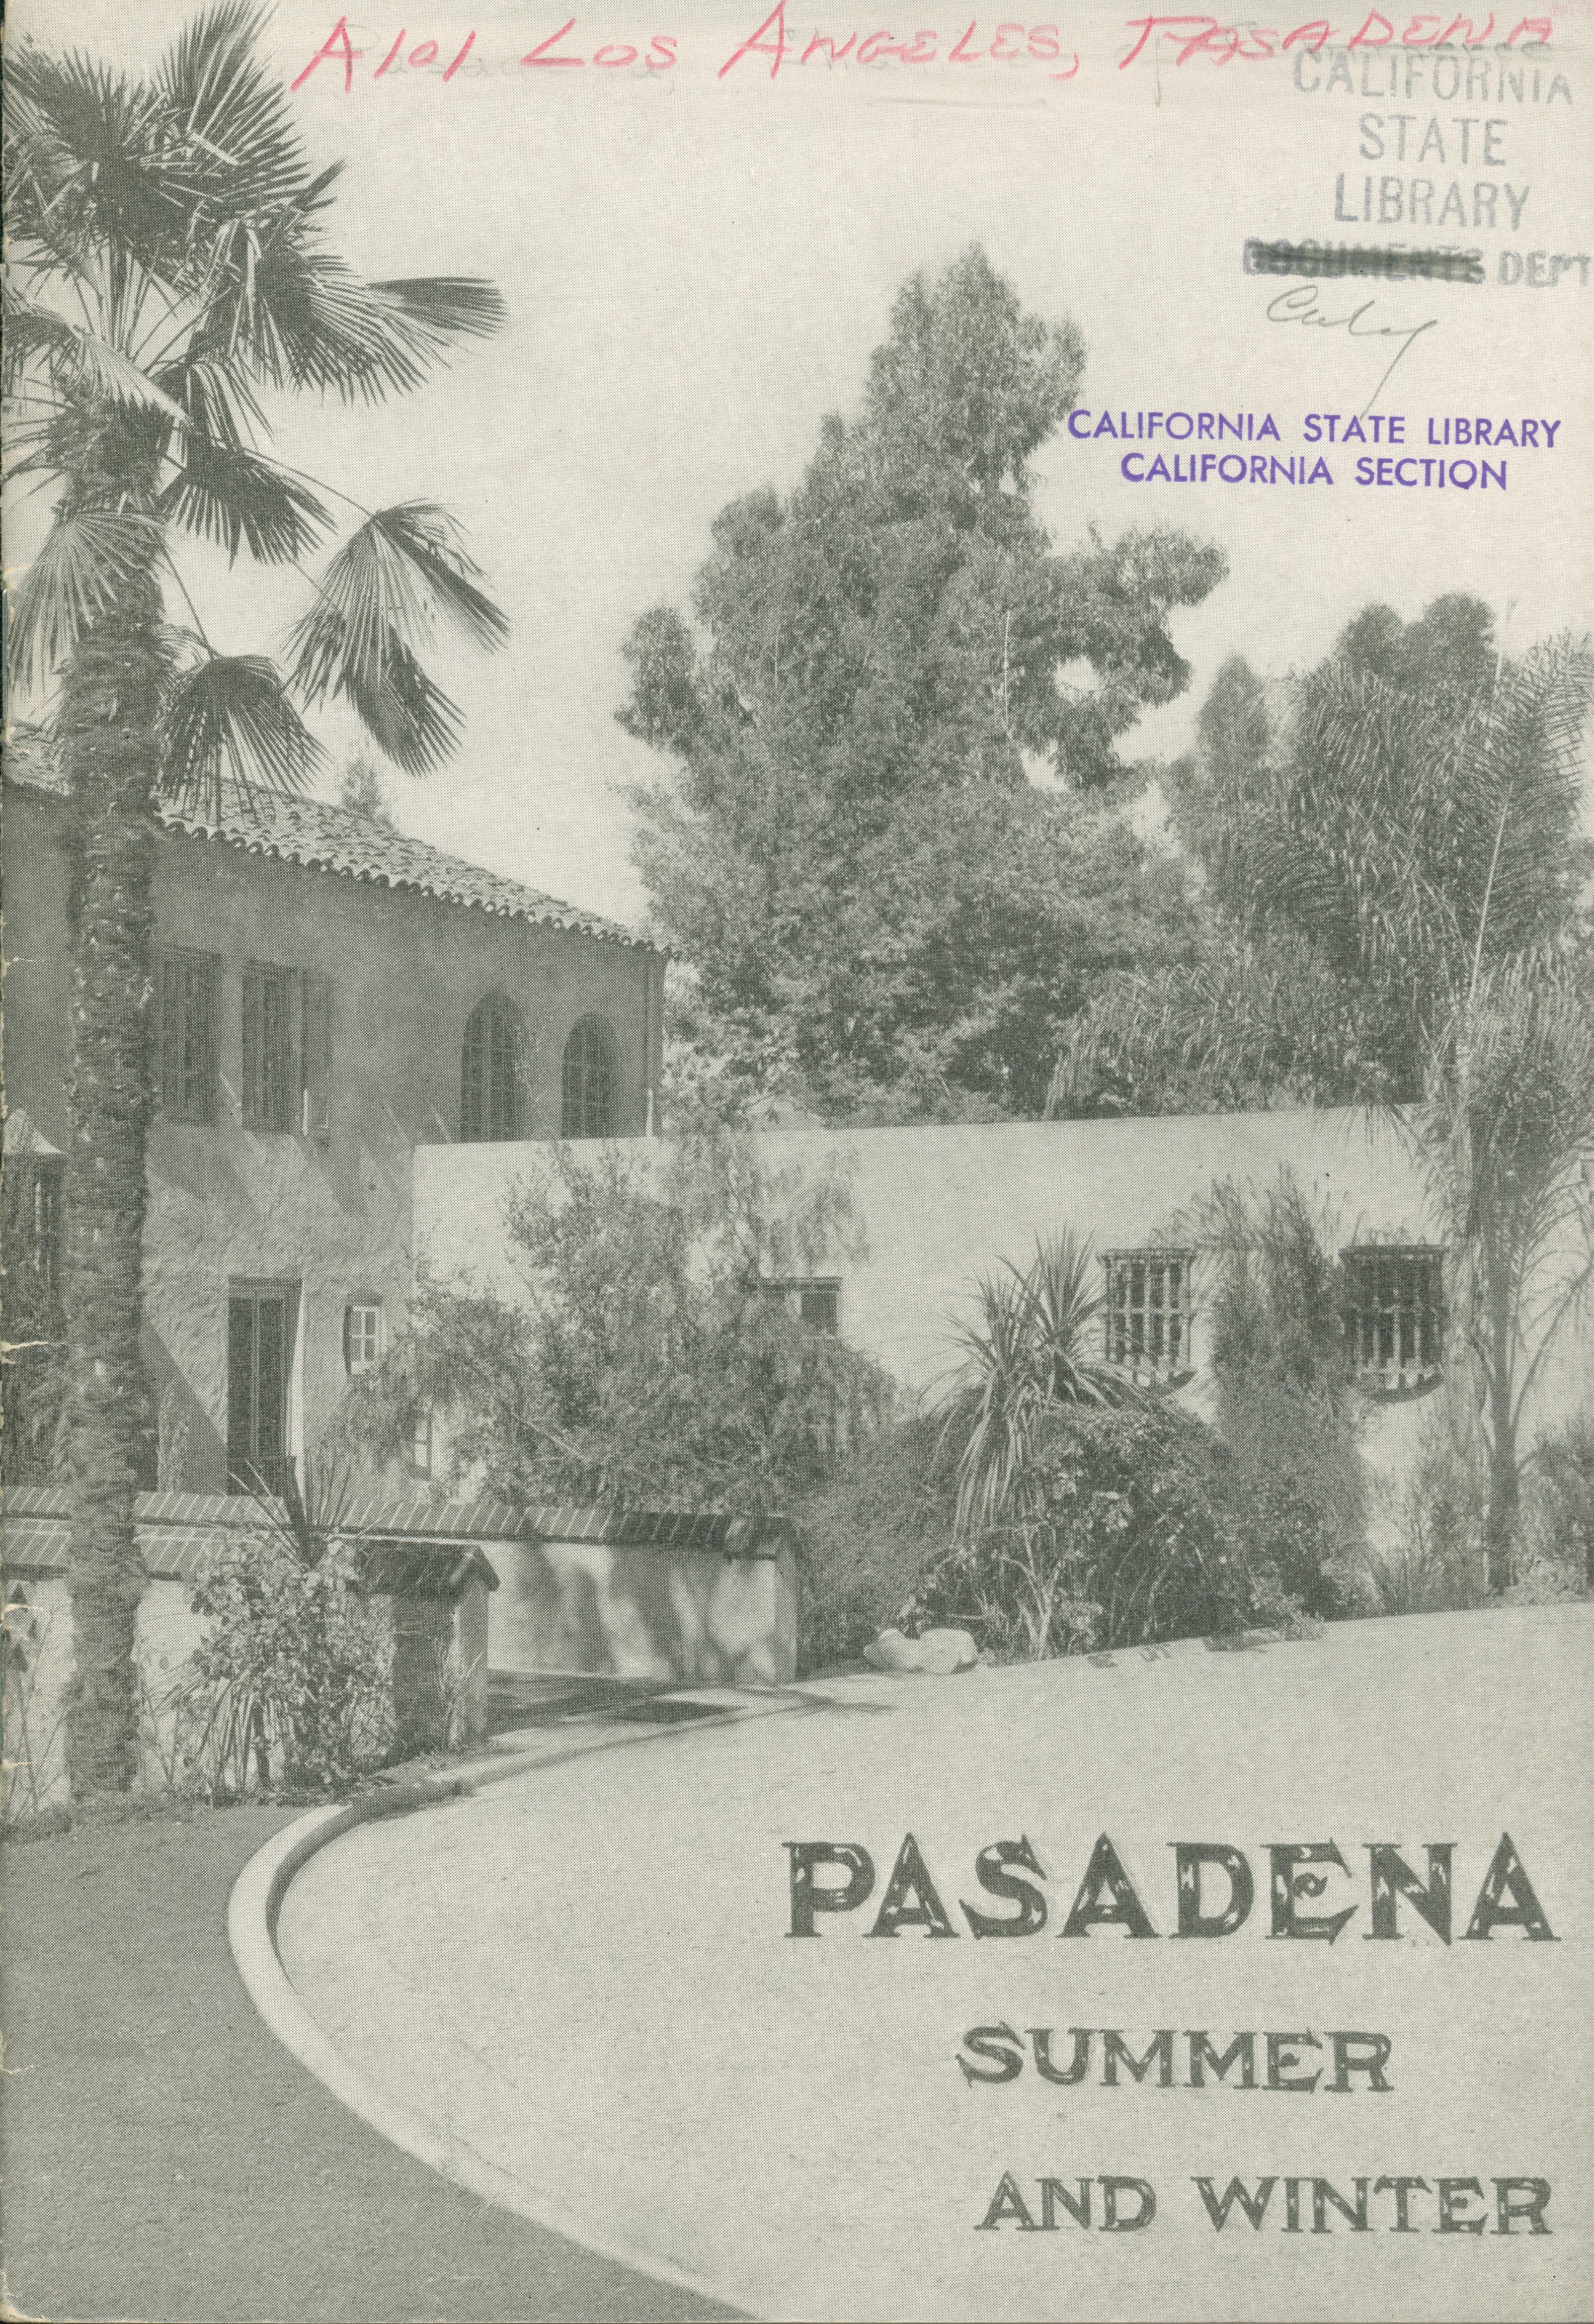 Front cover shows a building, driveway and grounds